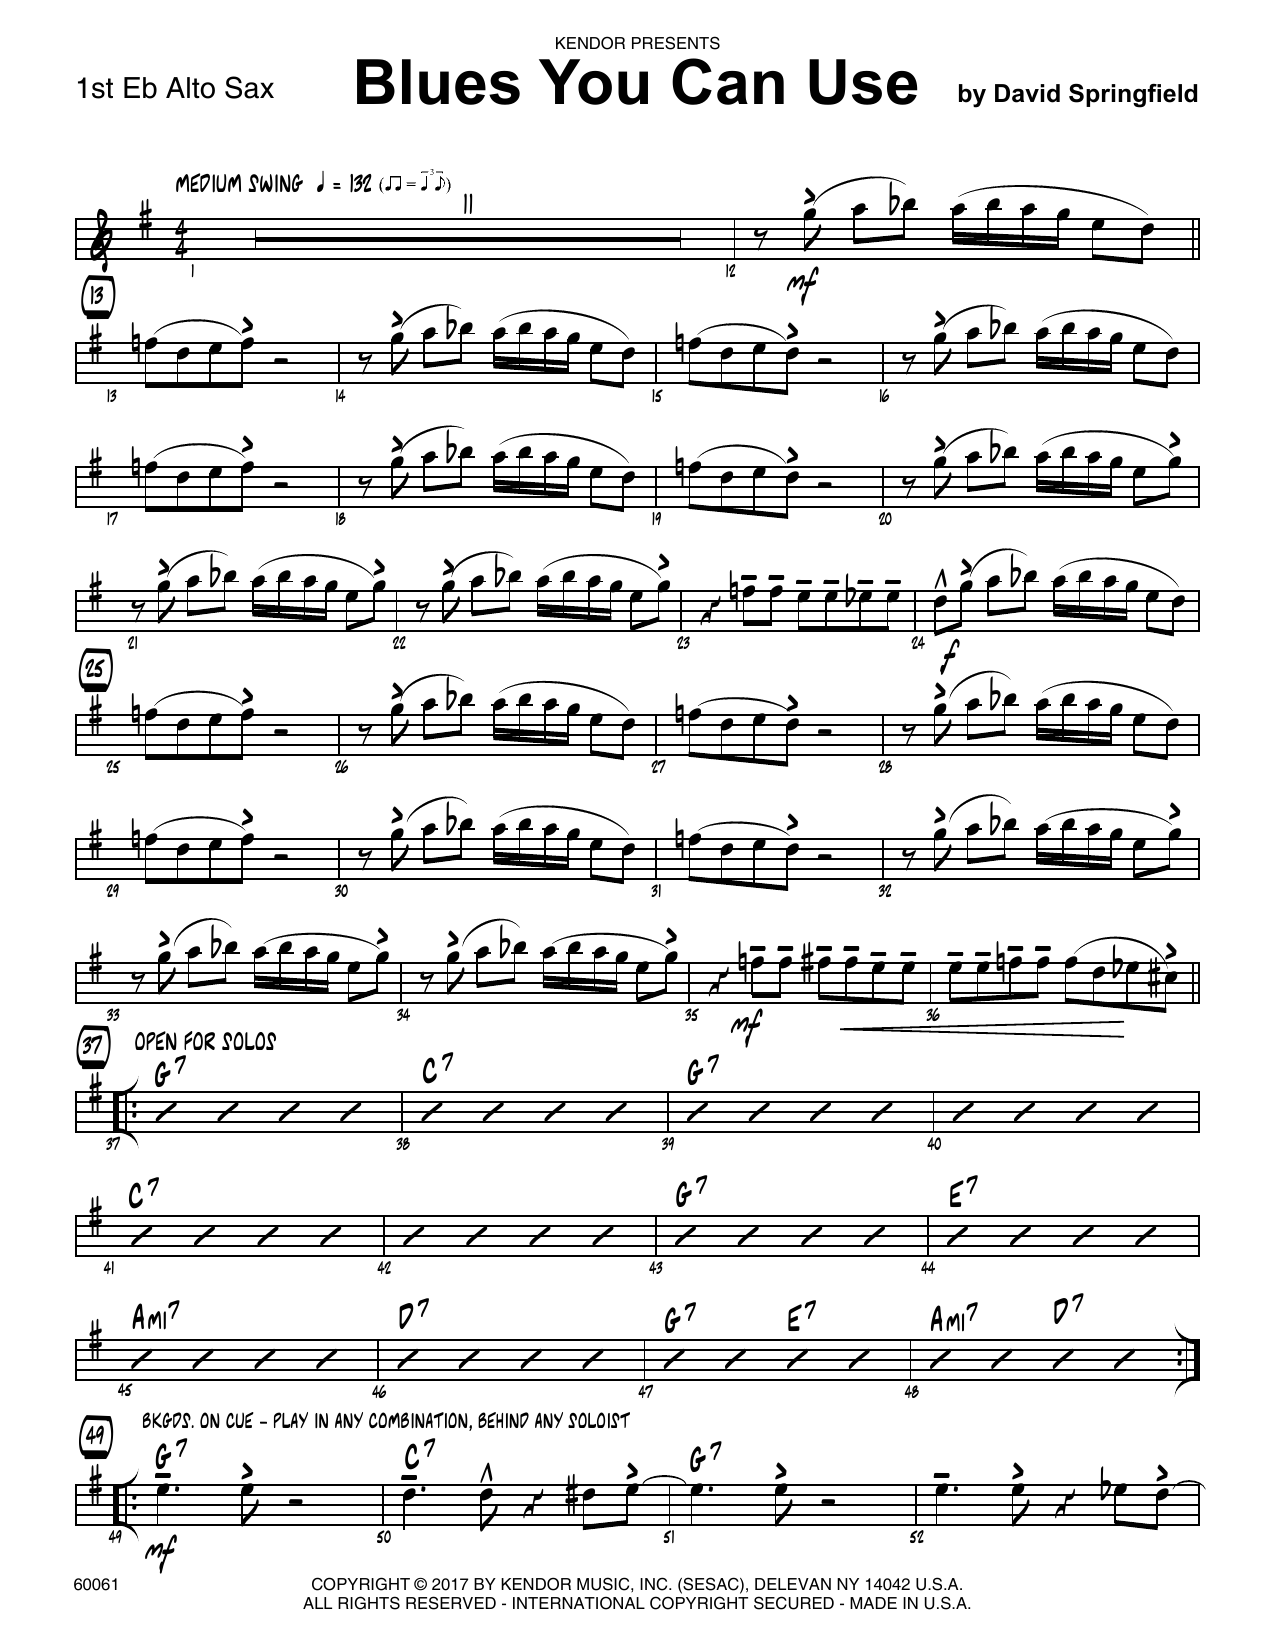 Download David Springfield Blues You Can Use - 1st Eb Alto Saxopho Sheet Music